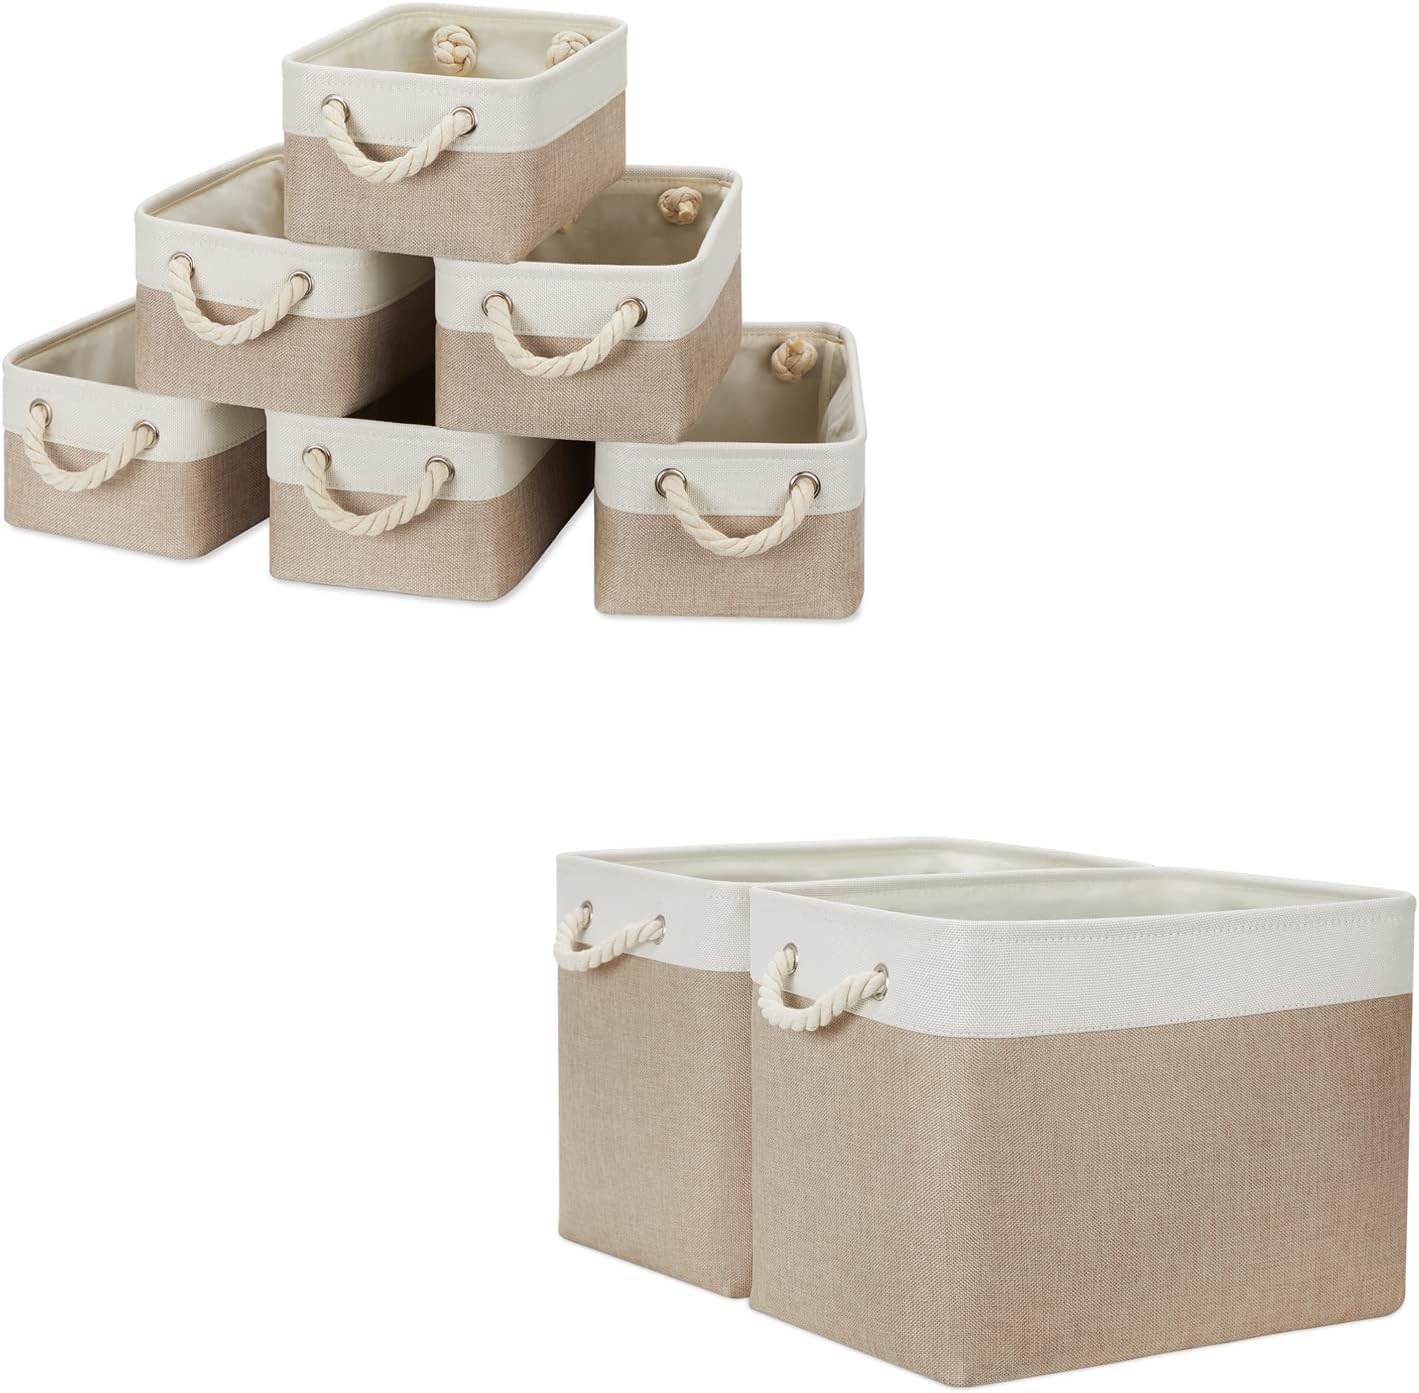 Temary Fabric Storage Baskets Set Of 6 Small Storage Bins Bundled with 2 Pack Decorative Baskets for Storage (White&Khaki, 11.8Lx7.9Wx5.3H Inches, 16Lx12Wx12H inches)